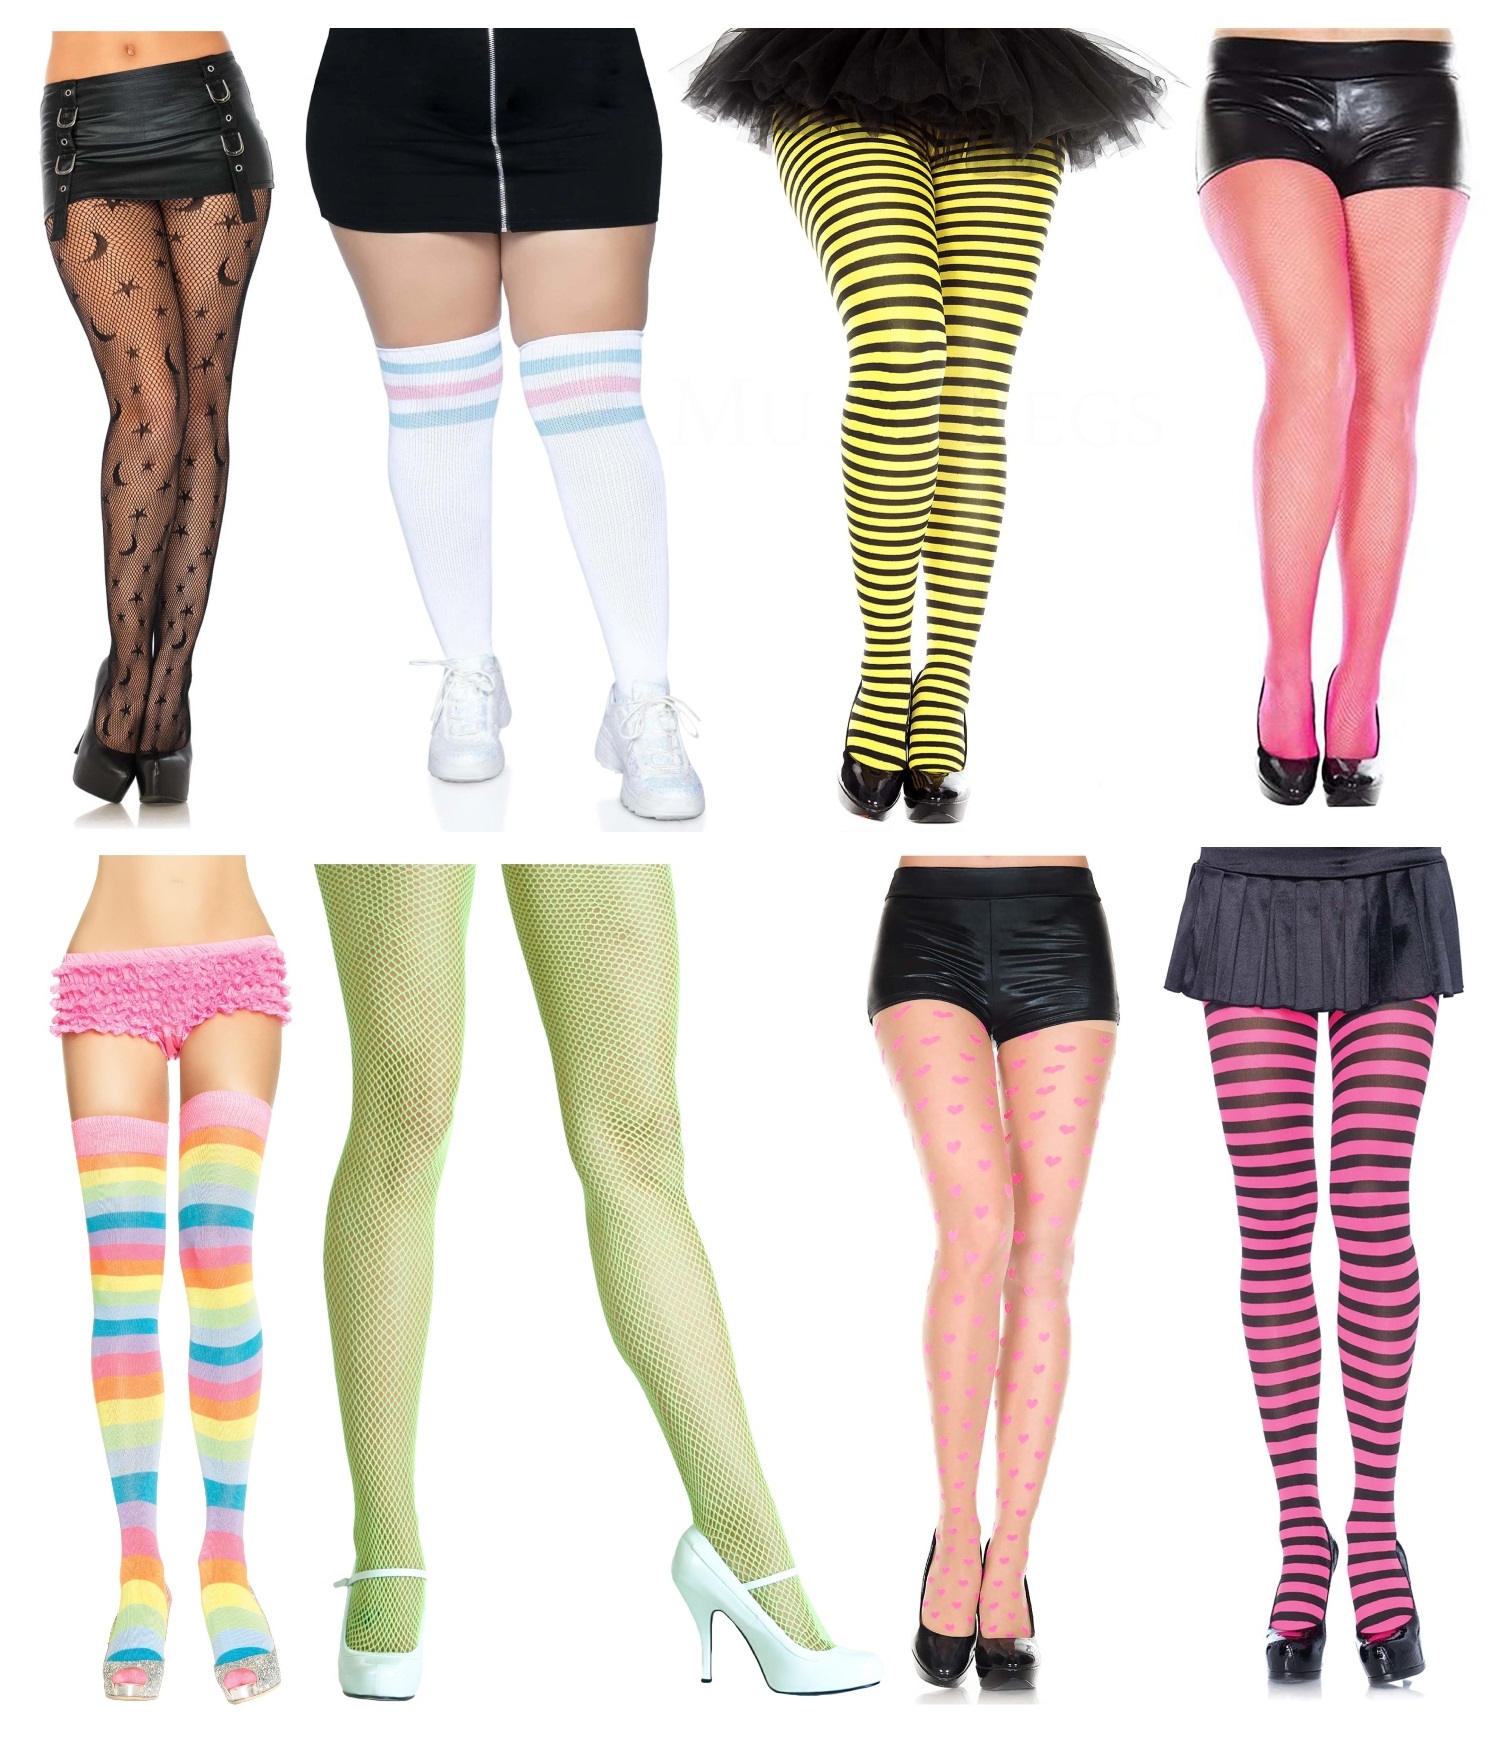 Colorful Tights and Hosiery